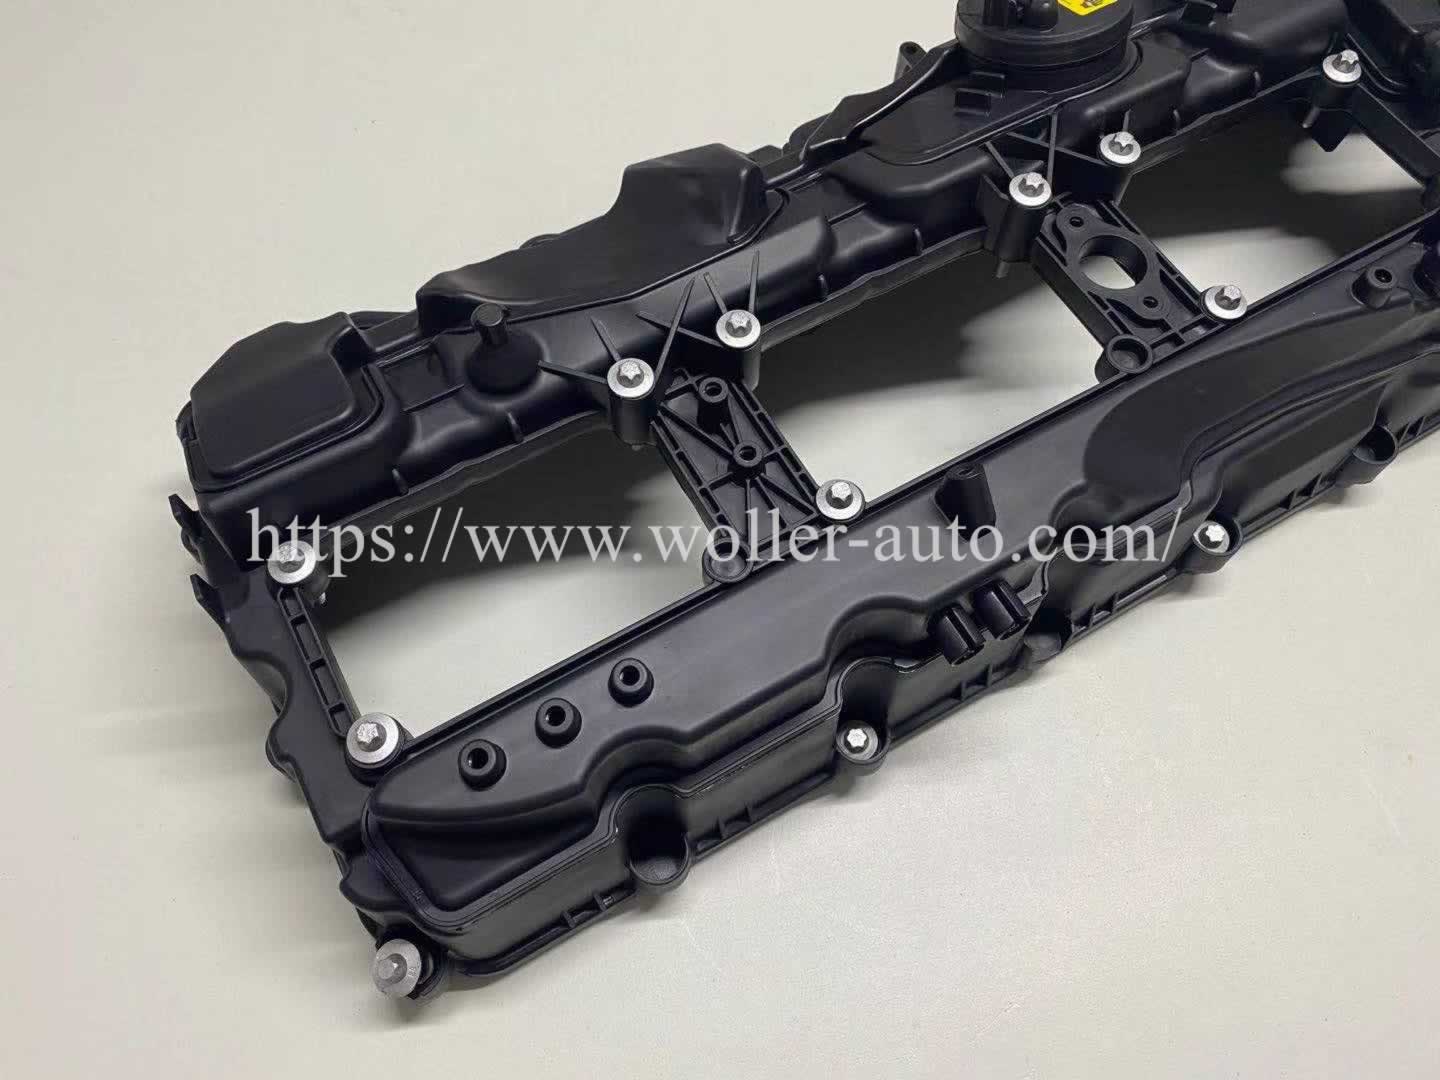 Engine Valve Cover OE 11127570292 for BMW N55